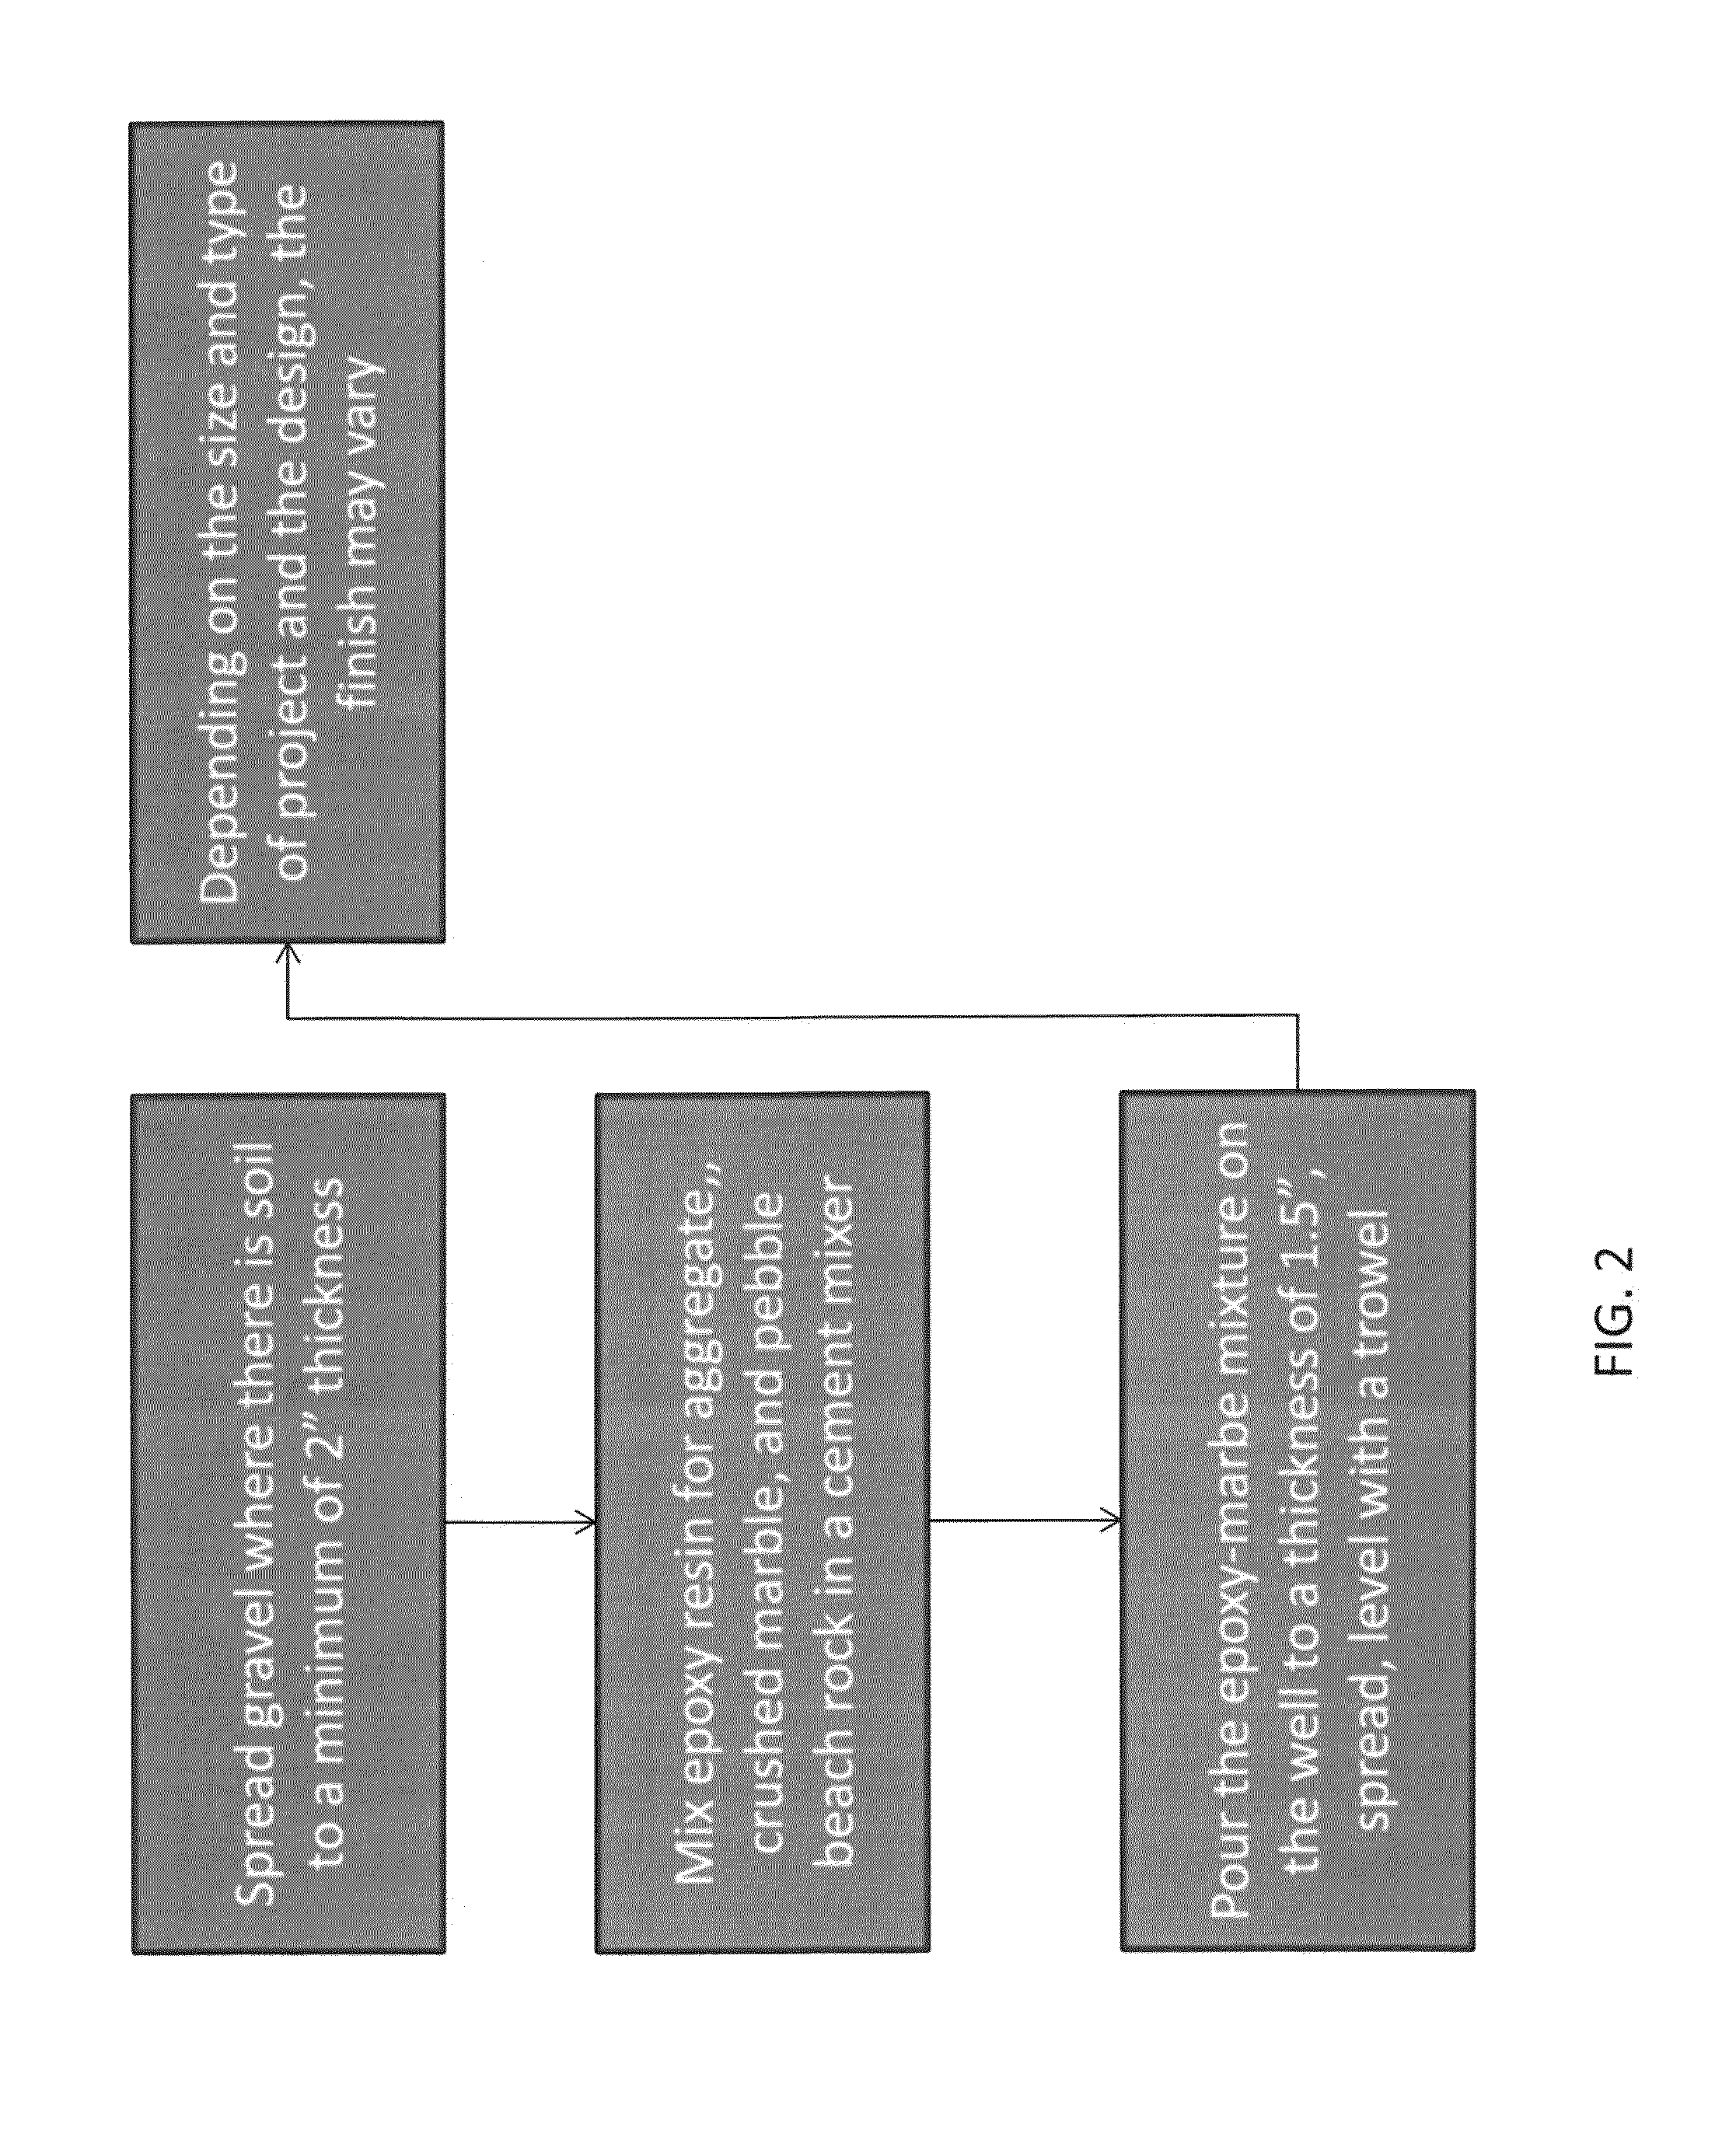 Tree Well and Related Methods